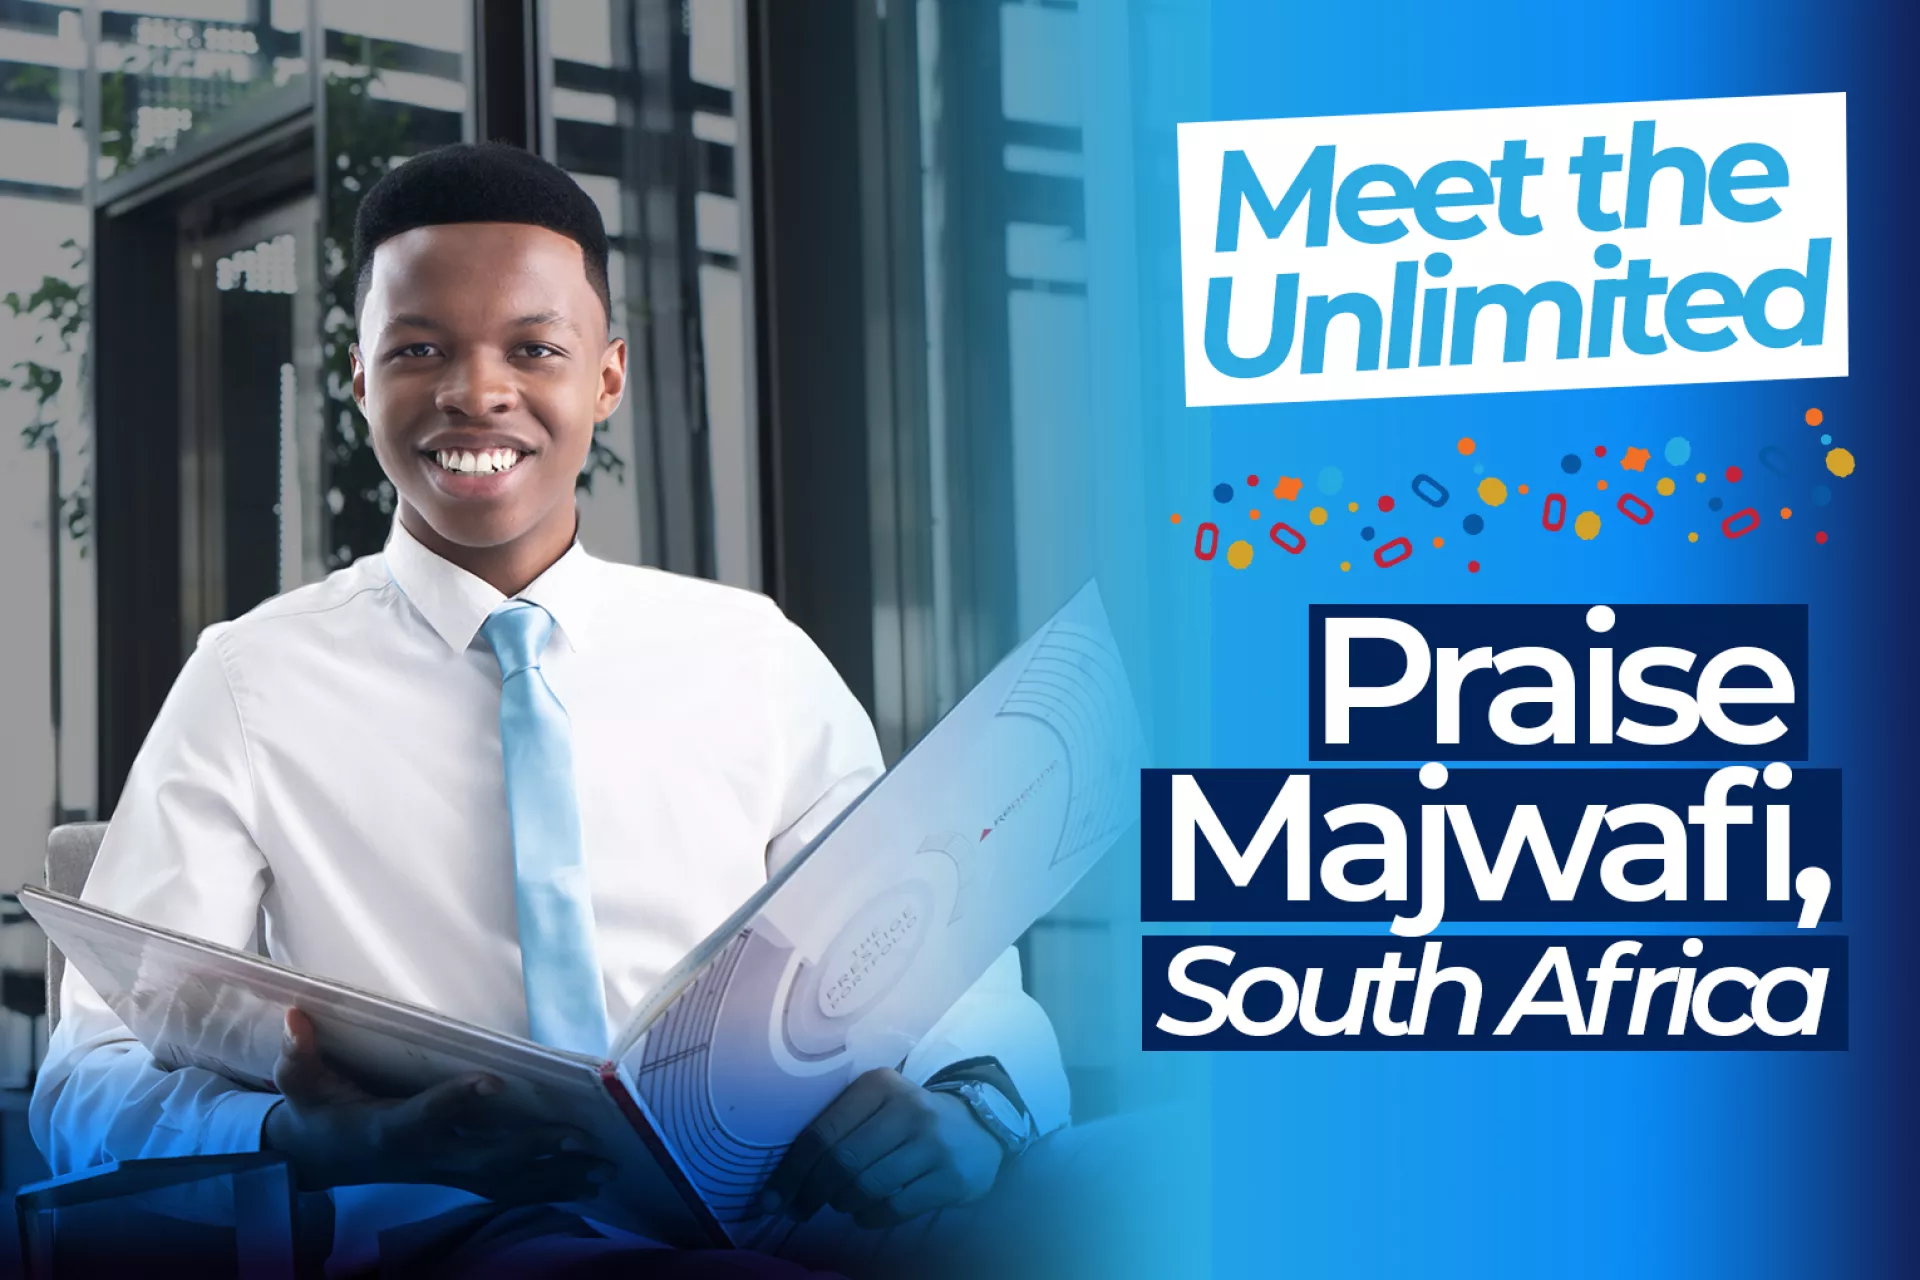 Graphic containing a portrait of Praise together with the inscriptions "meet the unlimited" and "Praise Majwafi, South Africa"